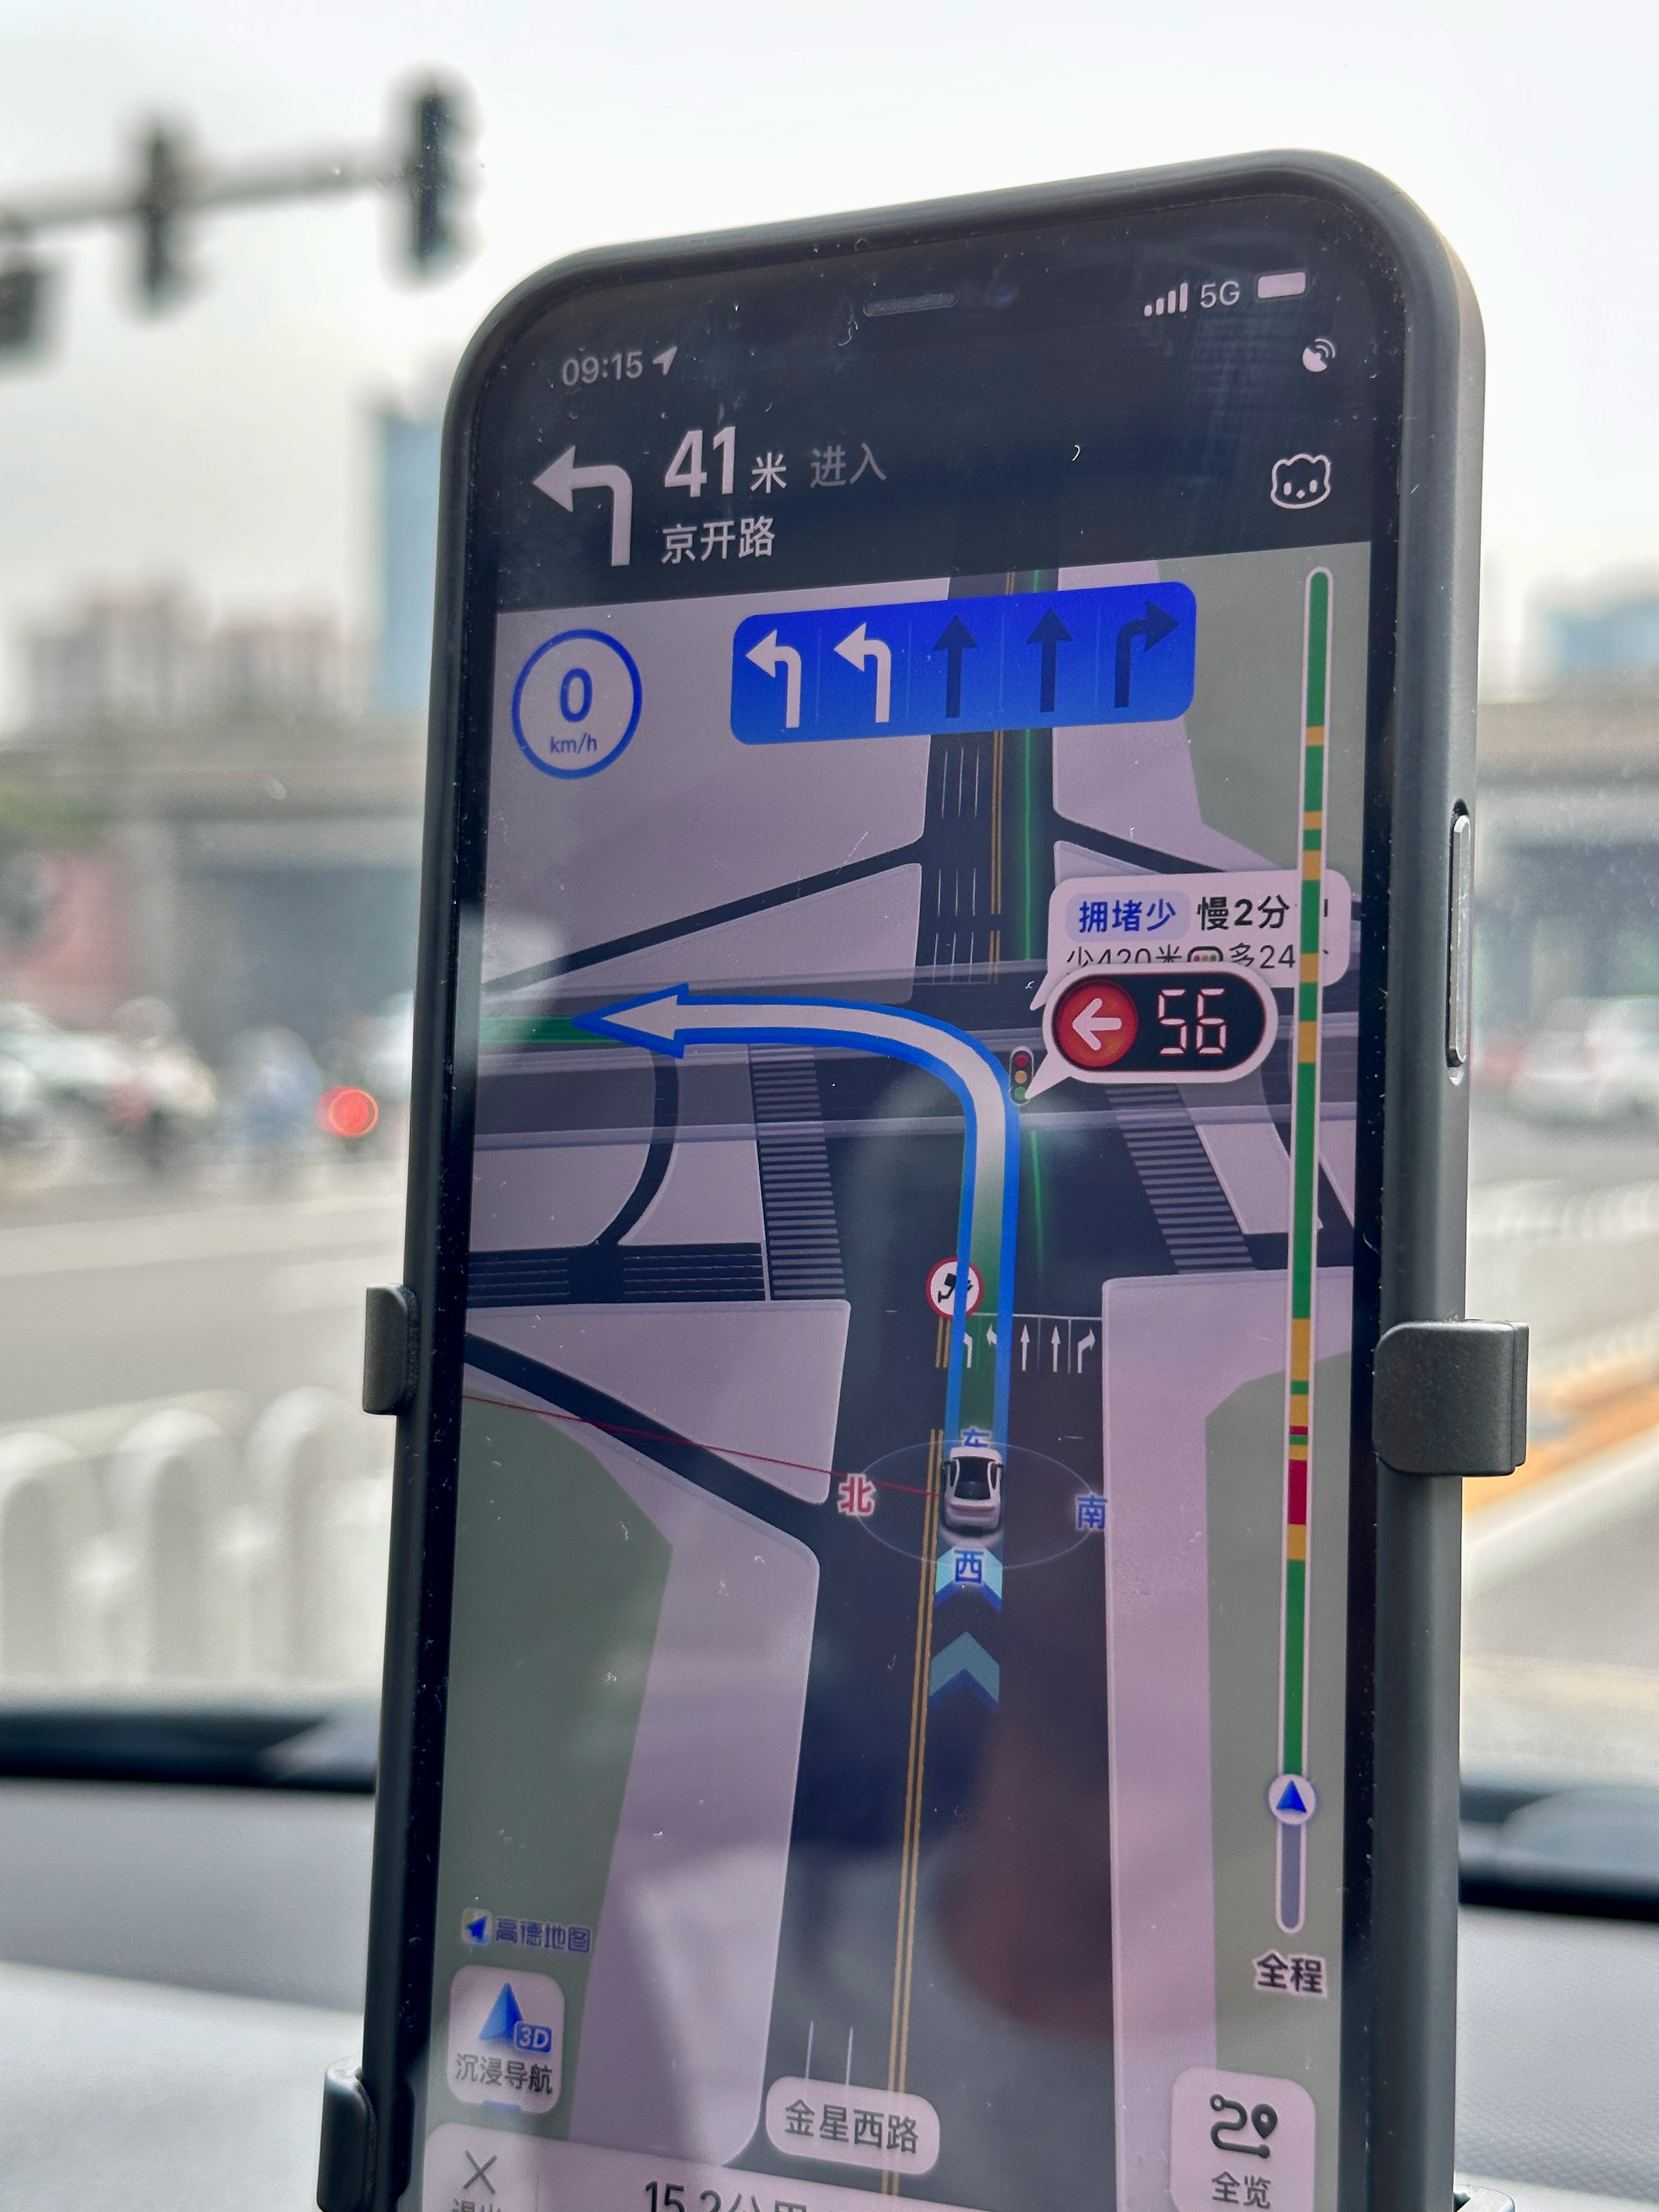 Photo of a phone showing a navigation app in China. The app is suggesting a left turn and shows that there are 56 seconds left on the red light.